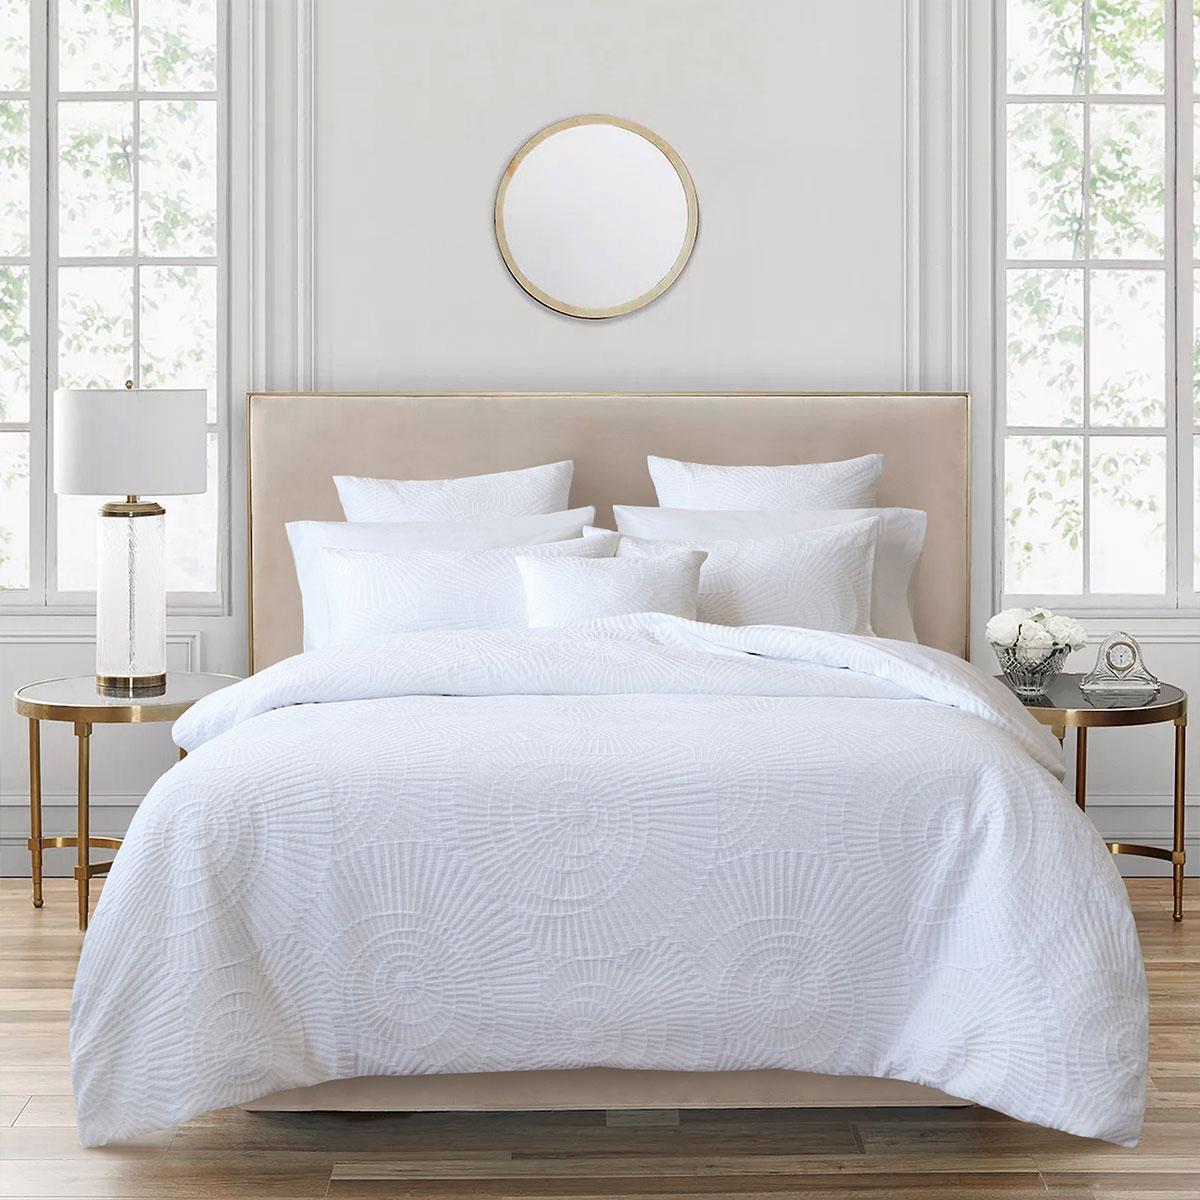 Bianca Byron White Quilt Cover Set Queen